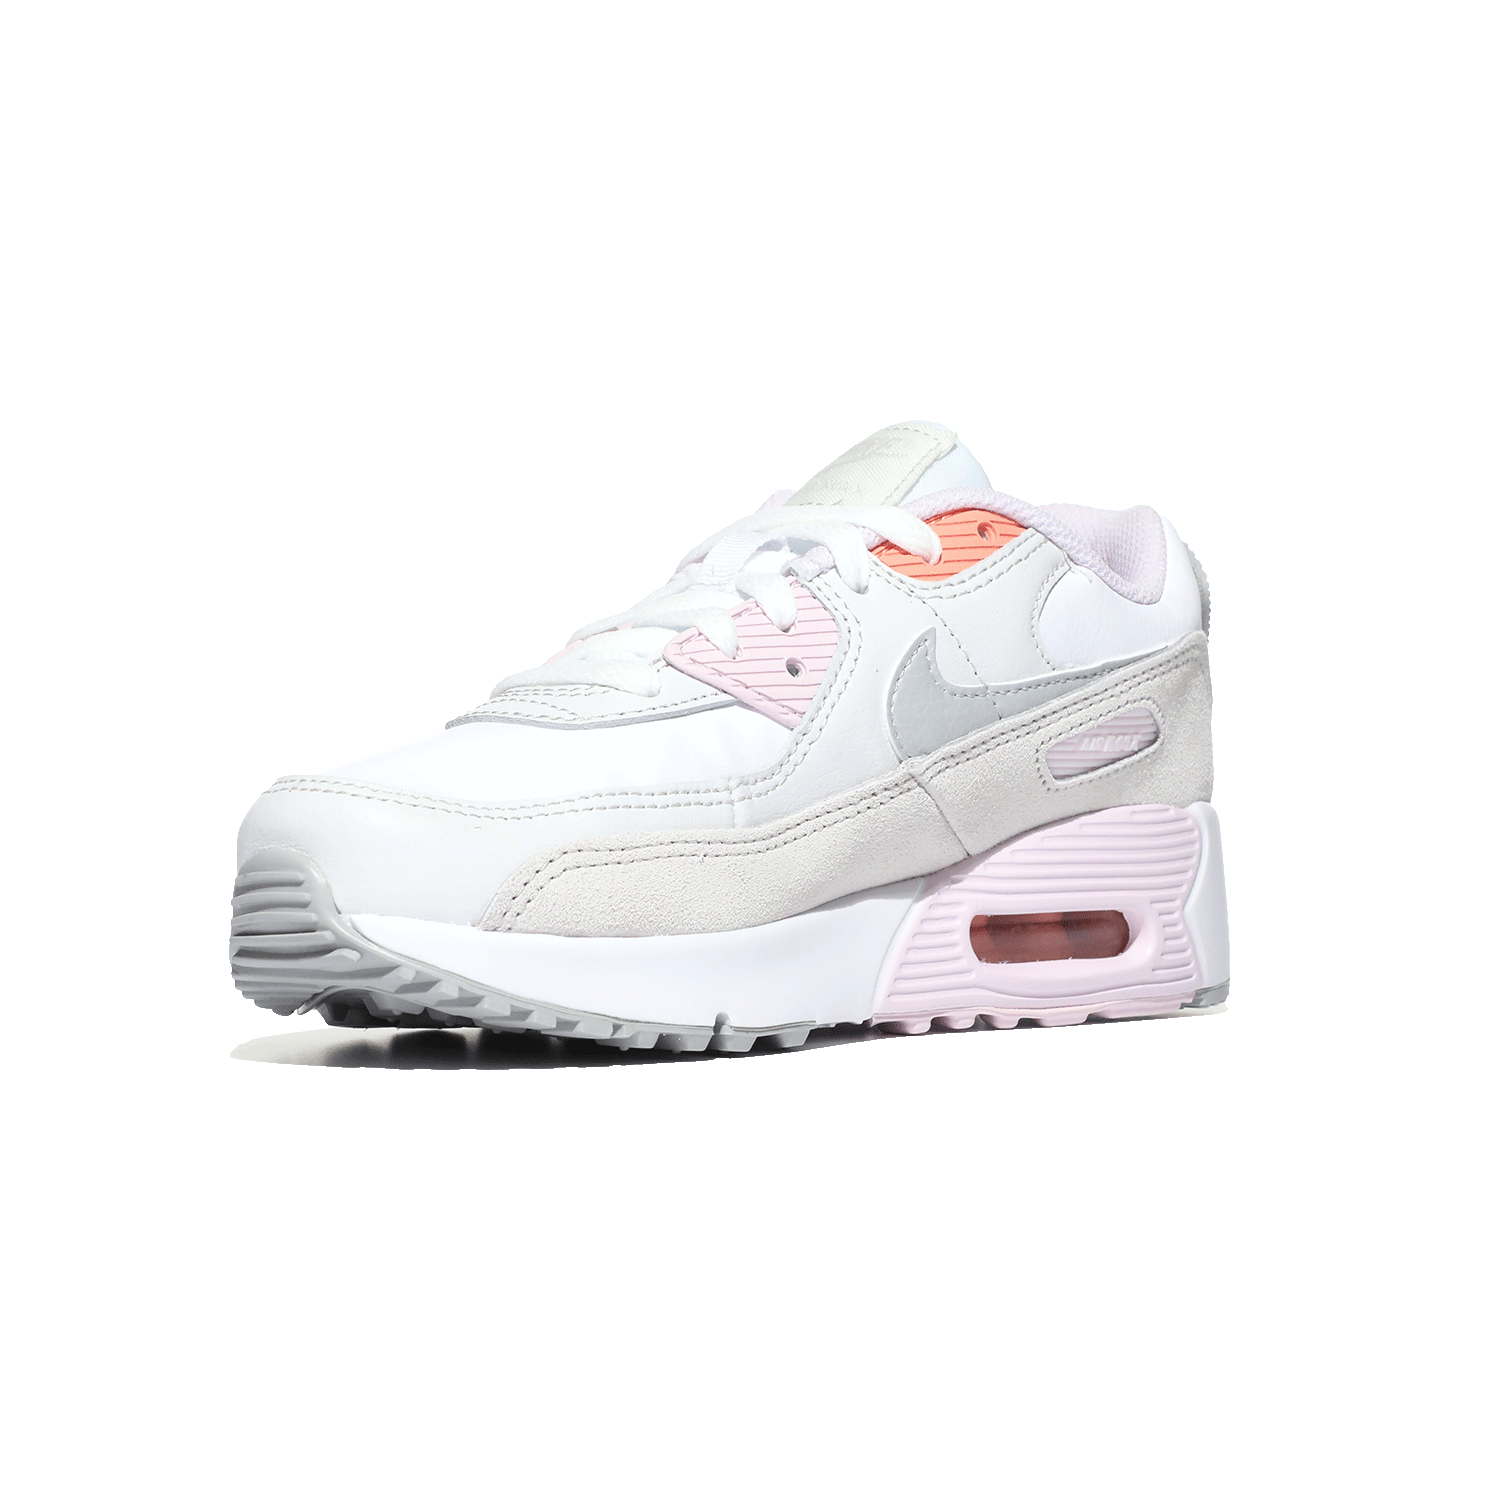 Image 5 of Air Max 90 LTR (Little Kid)